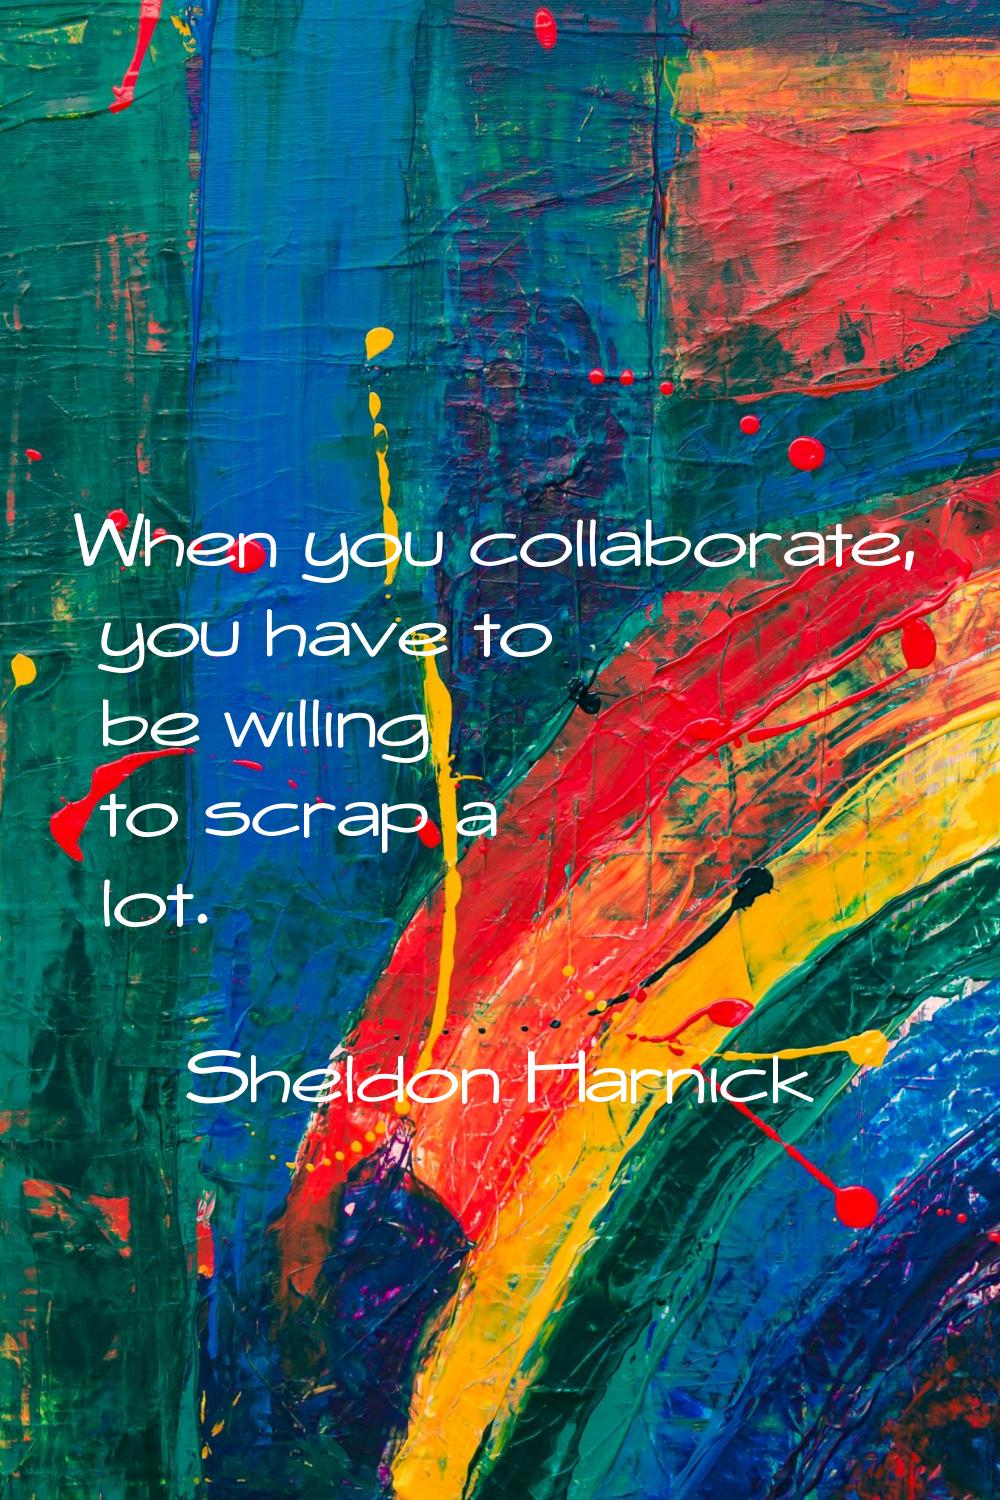 When you collaborate, you have to be willing to scrap a lot.